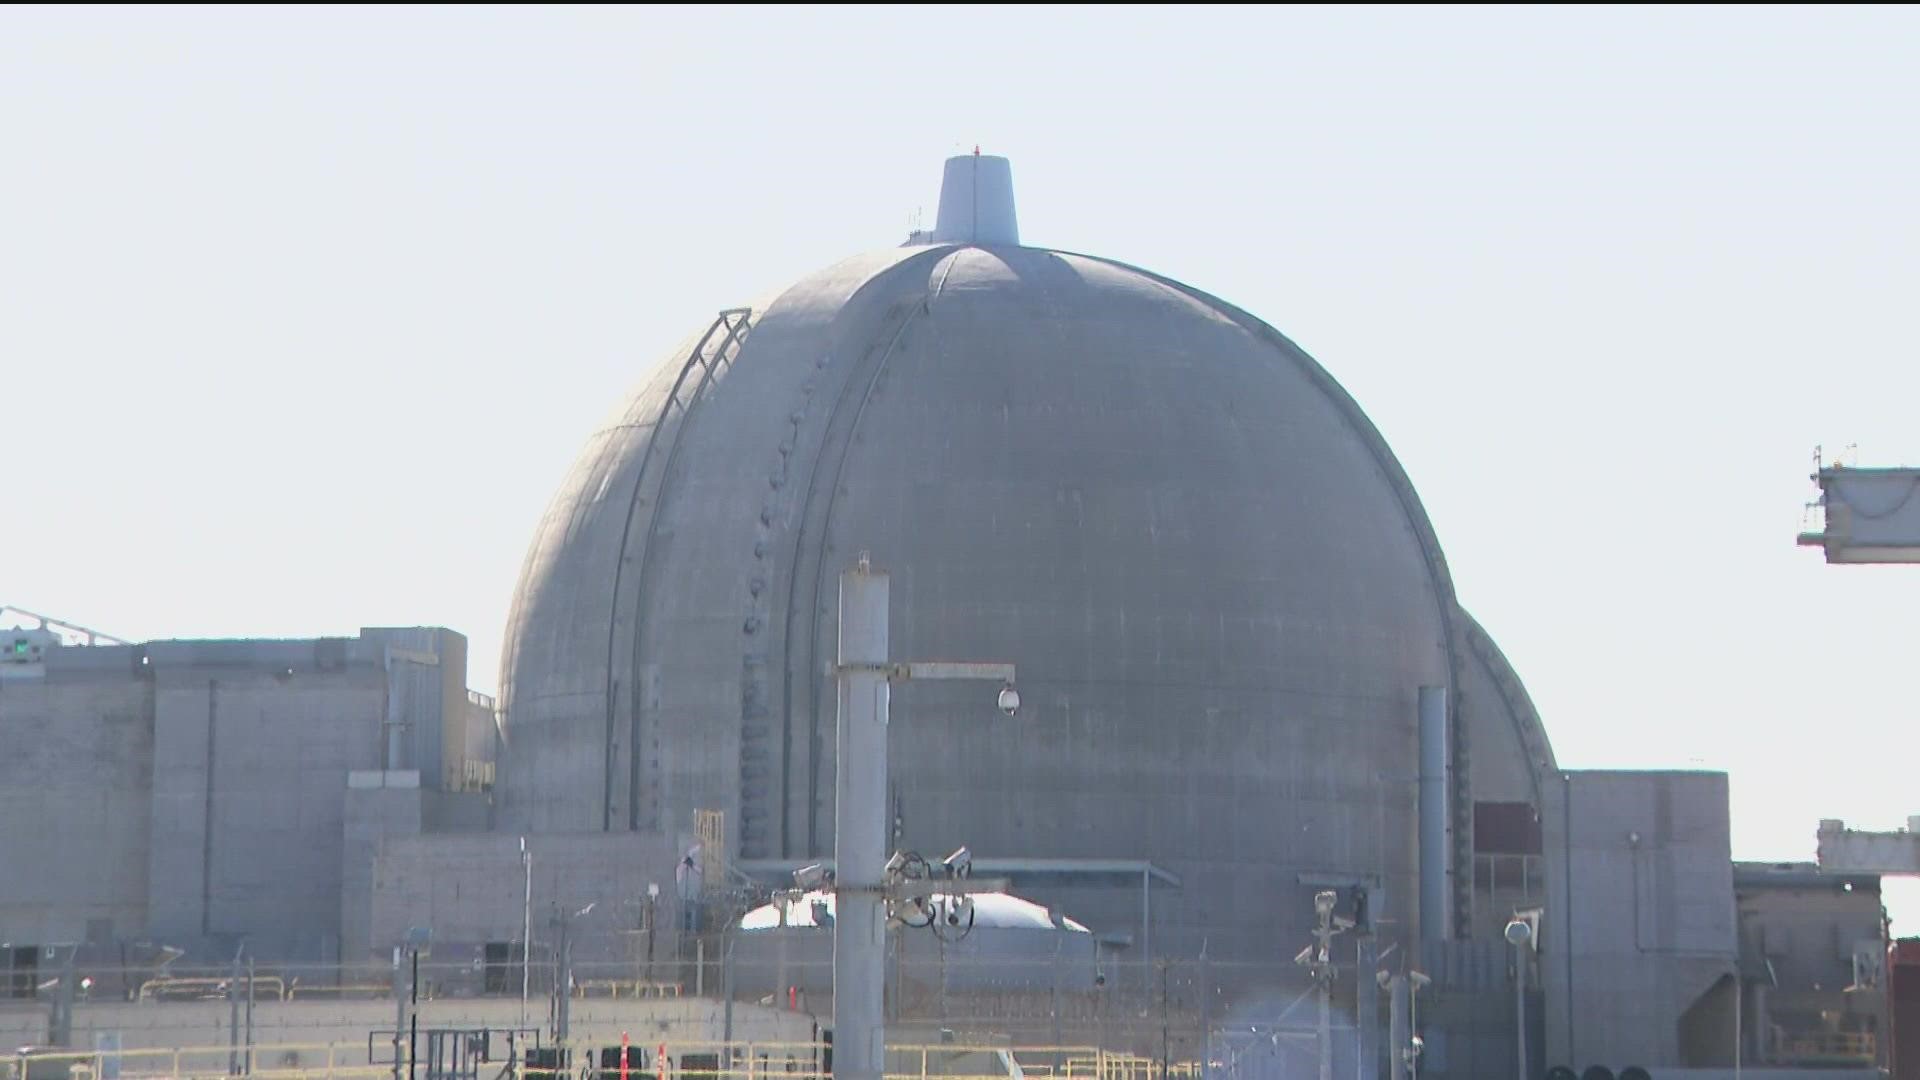 The Secretary for the U.S. Department of Energy paid a visit to the San Onofre nuclear site Thursday to discuss the search for solutions on nuclear waste storage.